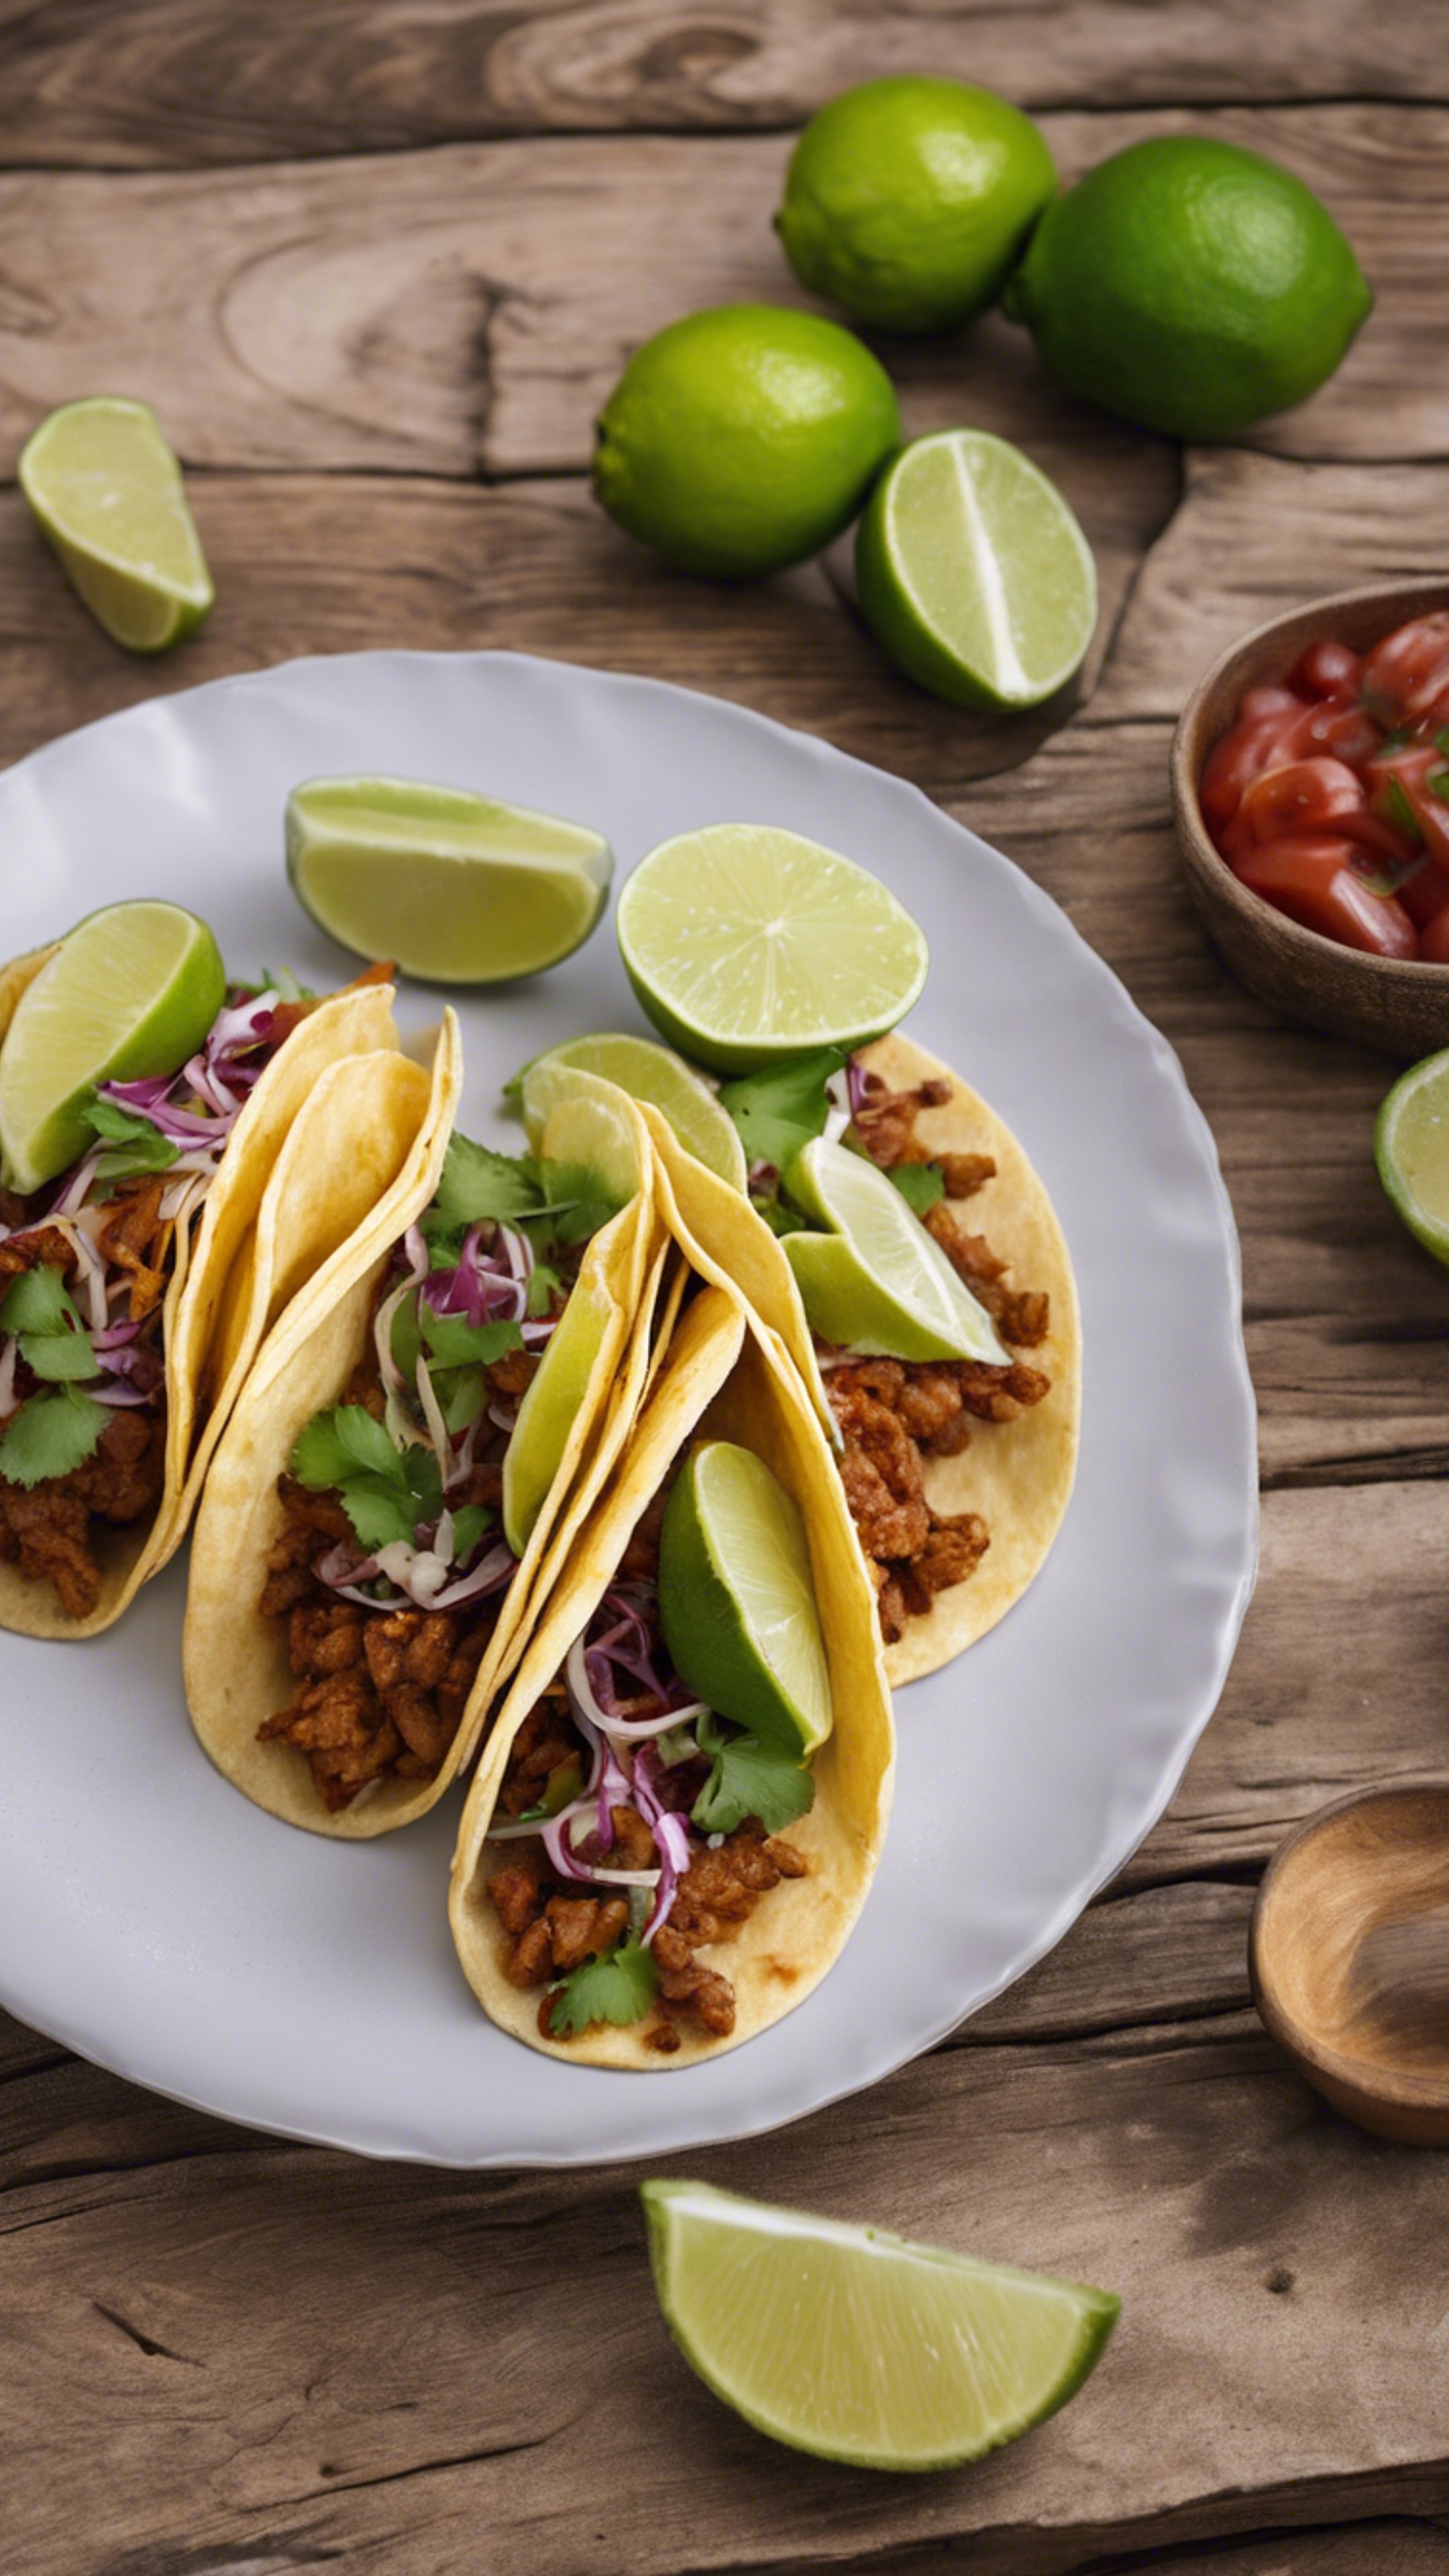 A plate of tacos garnished with fresh lime wedges on a rustic wooden table. טפט[5f6c6b777f9c4d0caf3c]